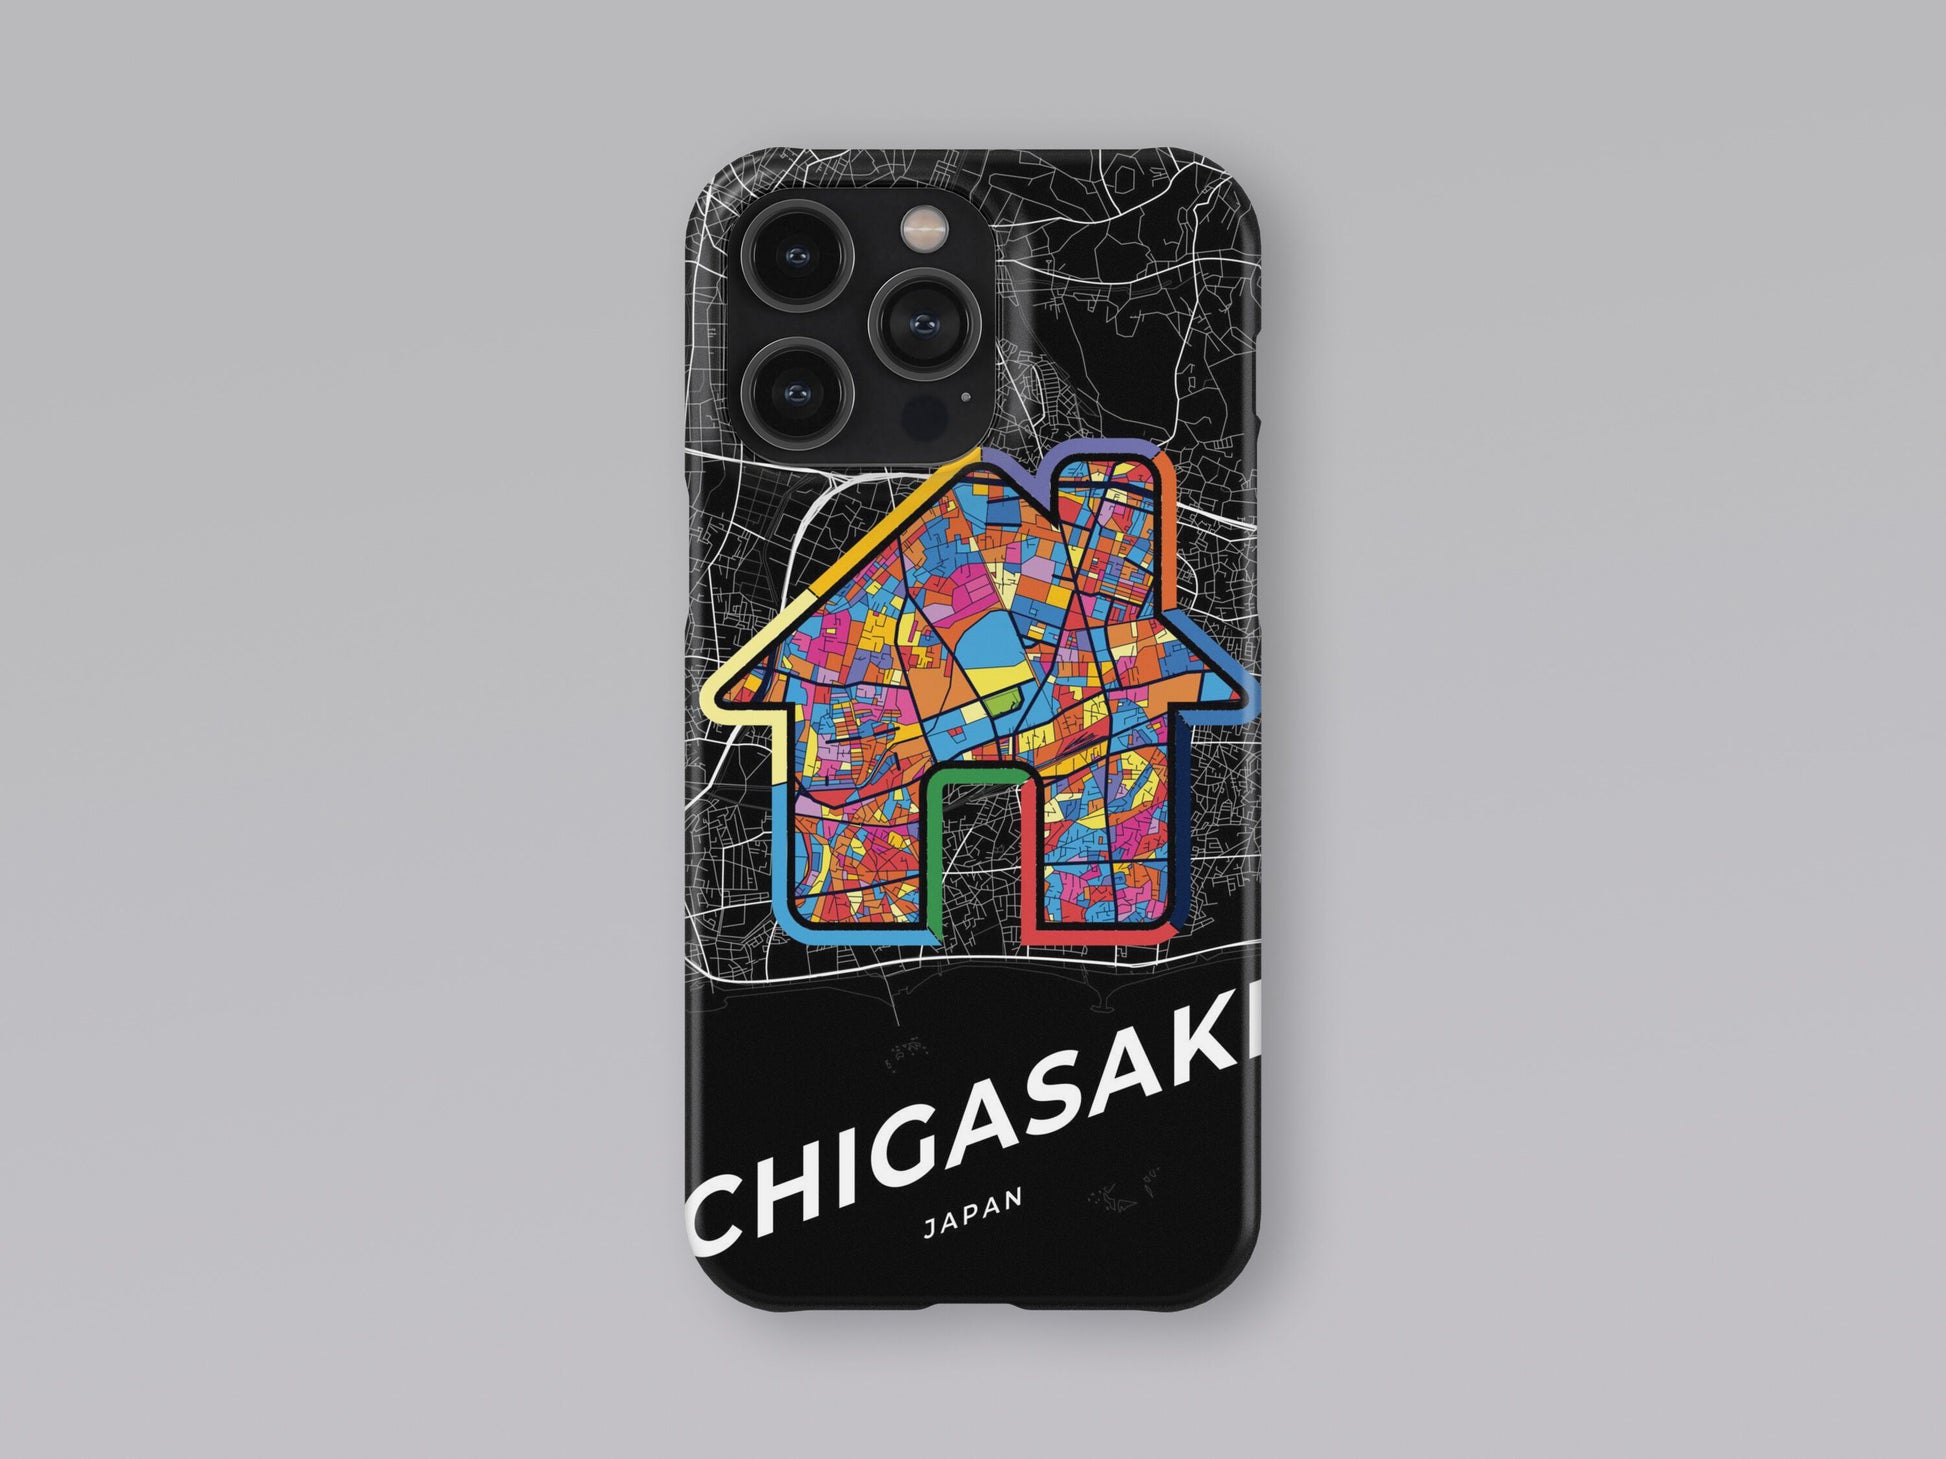 Chigasaki Japan slim phone case with colorful icon. Birthday, wedding or housewarming gift. Couple match cases. 3